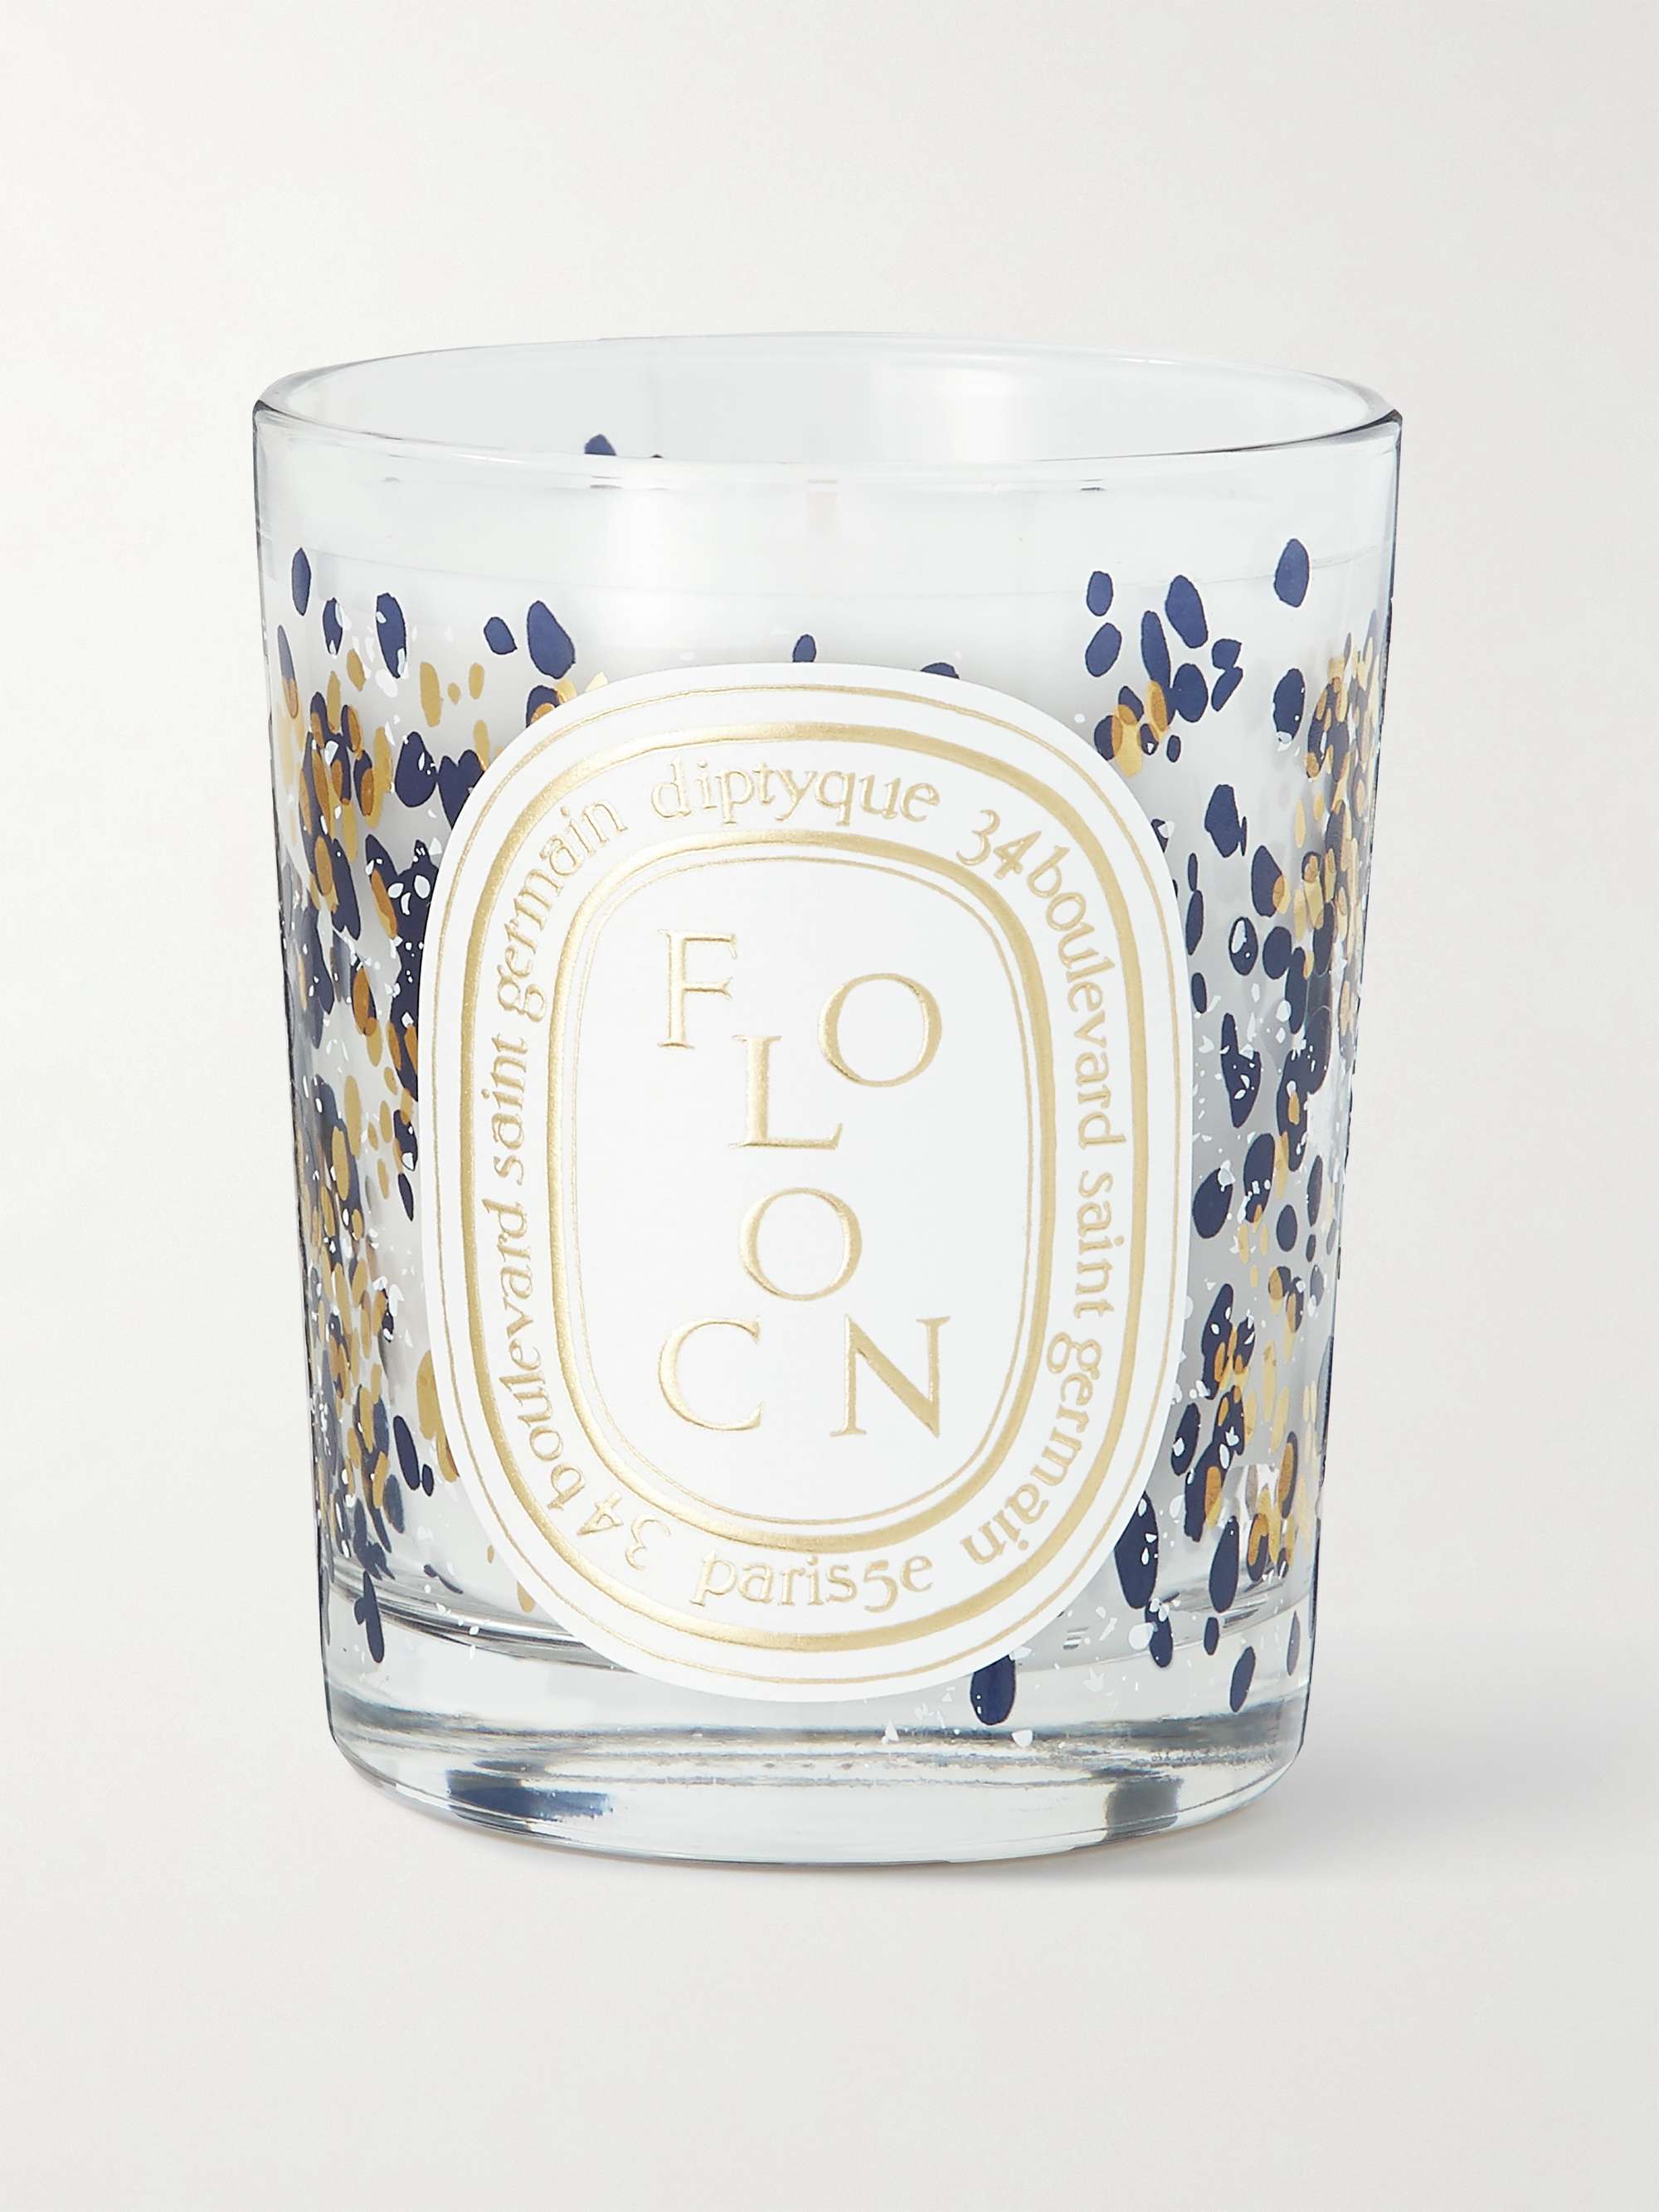 DIPTYQUE Flocon Scented Candle, 190g